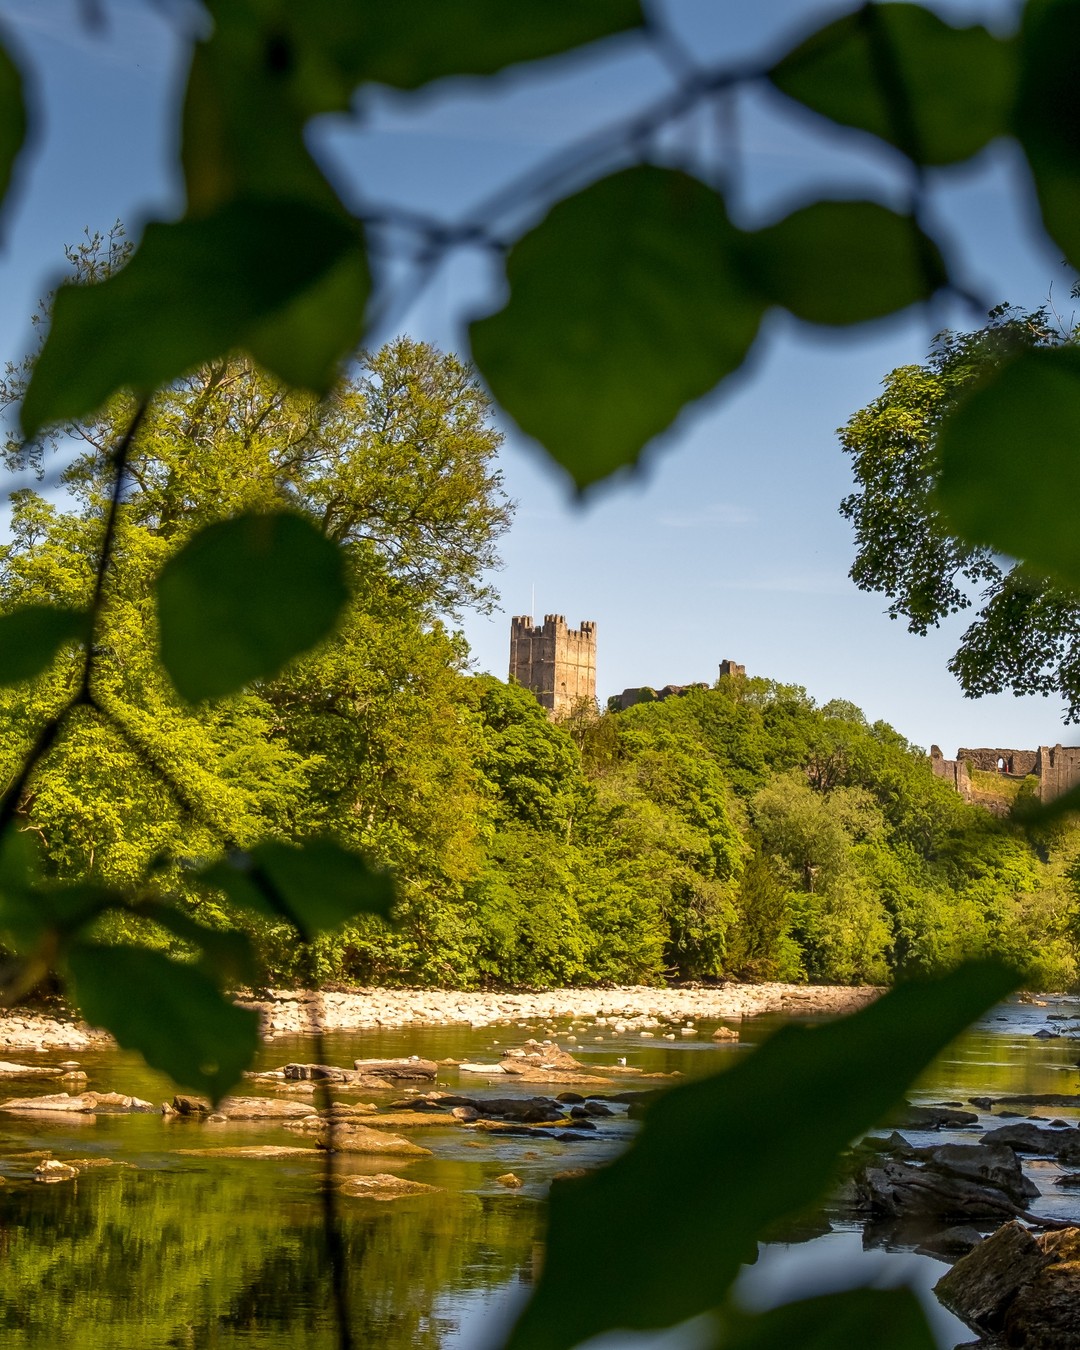 I have to admit, it's rather nice having woods, a river and a castle at the end of our road...

Honestly, we lucked out when we stumbled upon #RichmondYorkshire. We can be in the @yorkshiredales national park in five minutes by car and 15 minutes on foot. It is one of 10 national parks in England, so it’s probably fair to say it’s one of the most beautiful places in the country. We’ve fallen utterly in love with it.

#YorkshireDales #Welcometoyorkshire #visityorkshire #omgb #scenesofyorkshire #yorkshirepost